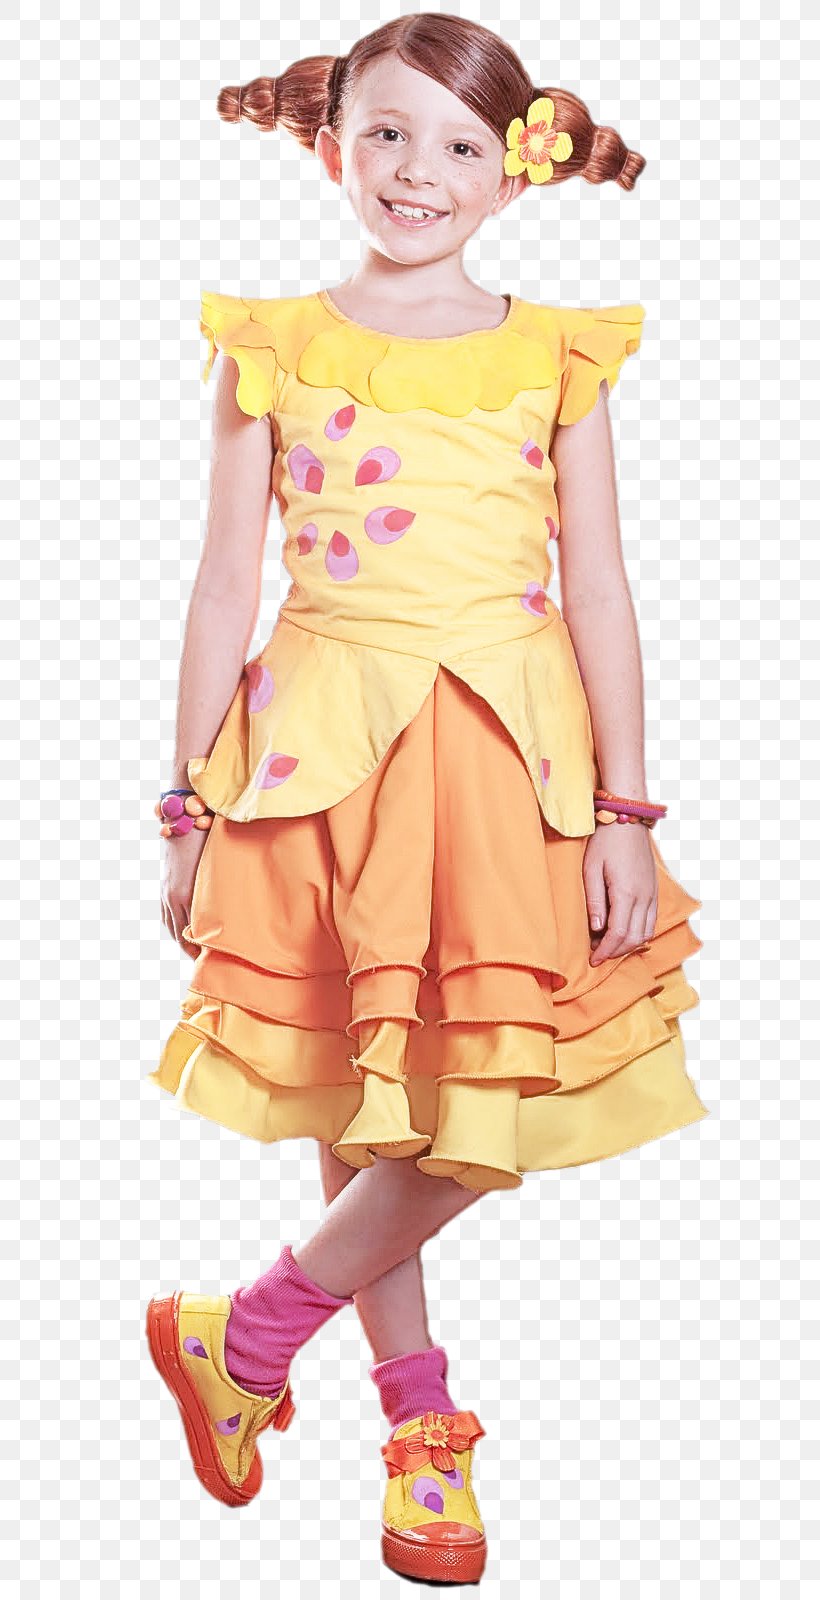 Clothing Yellow Pink Dress Day Dress, PNG, 738x1600px, Clothing, Day Dress, Dress, Fashion Model, Footwear Download Free